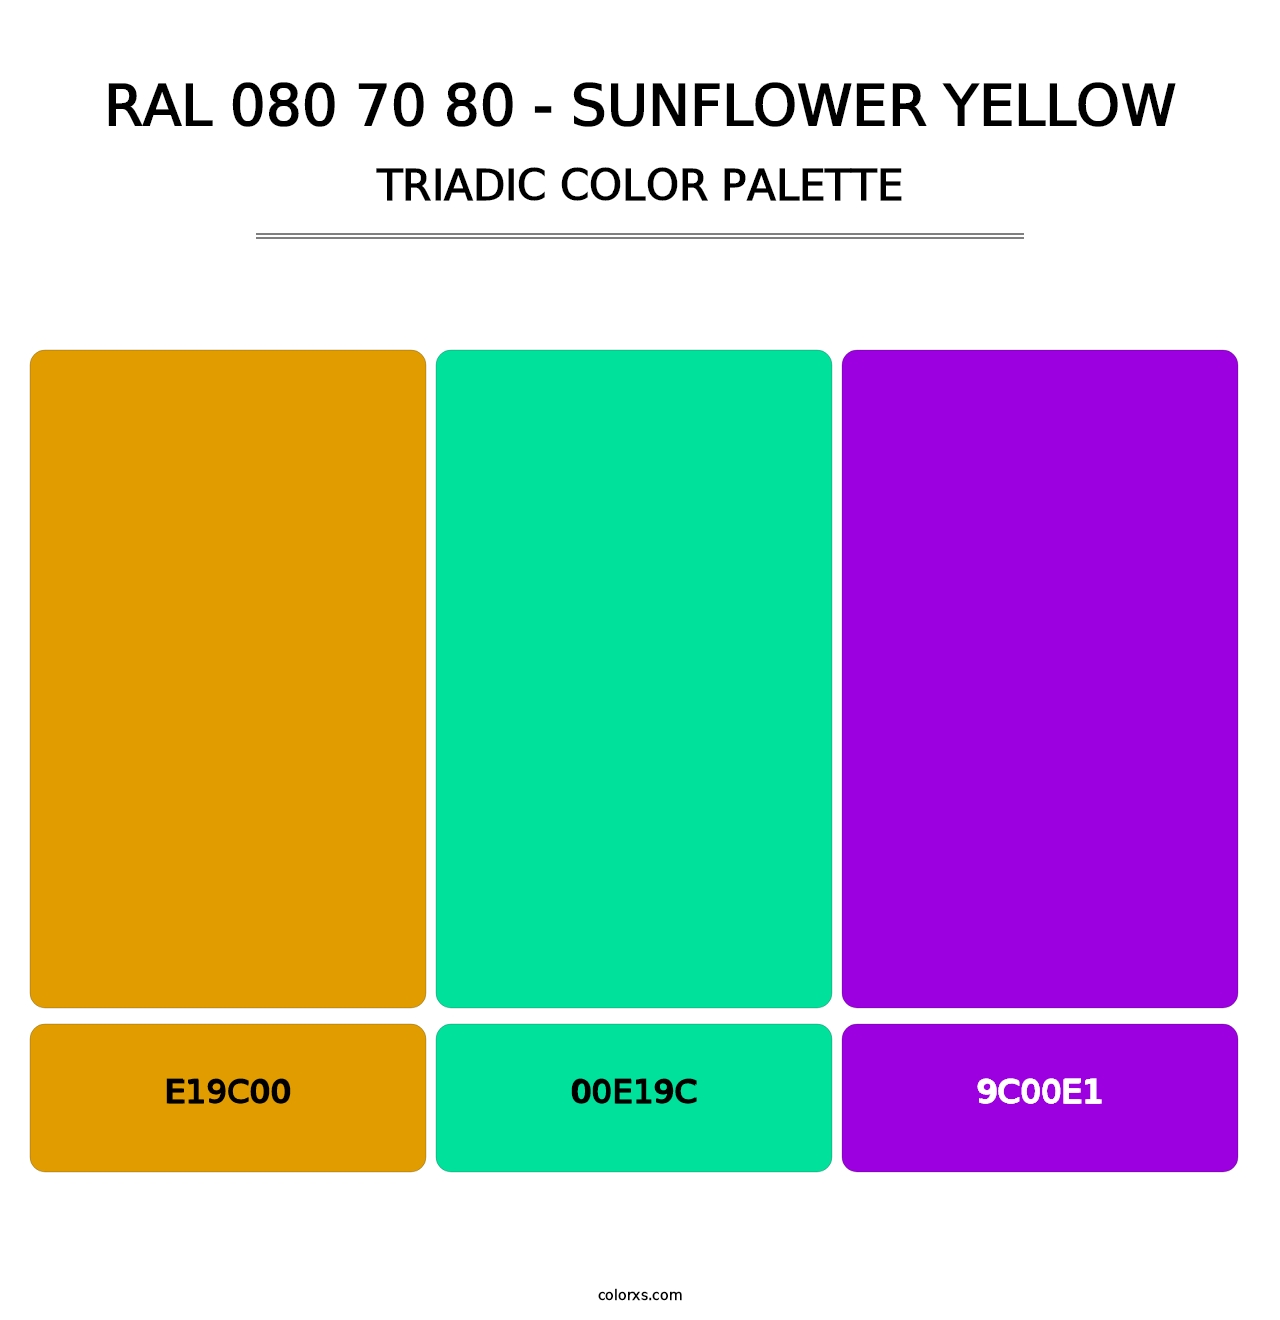 RAL 080 70 80 - Sunflower Yellow - Triadic Color Palette